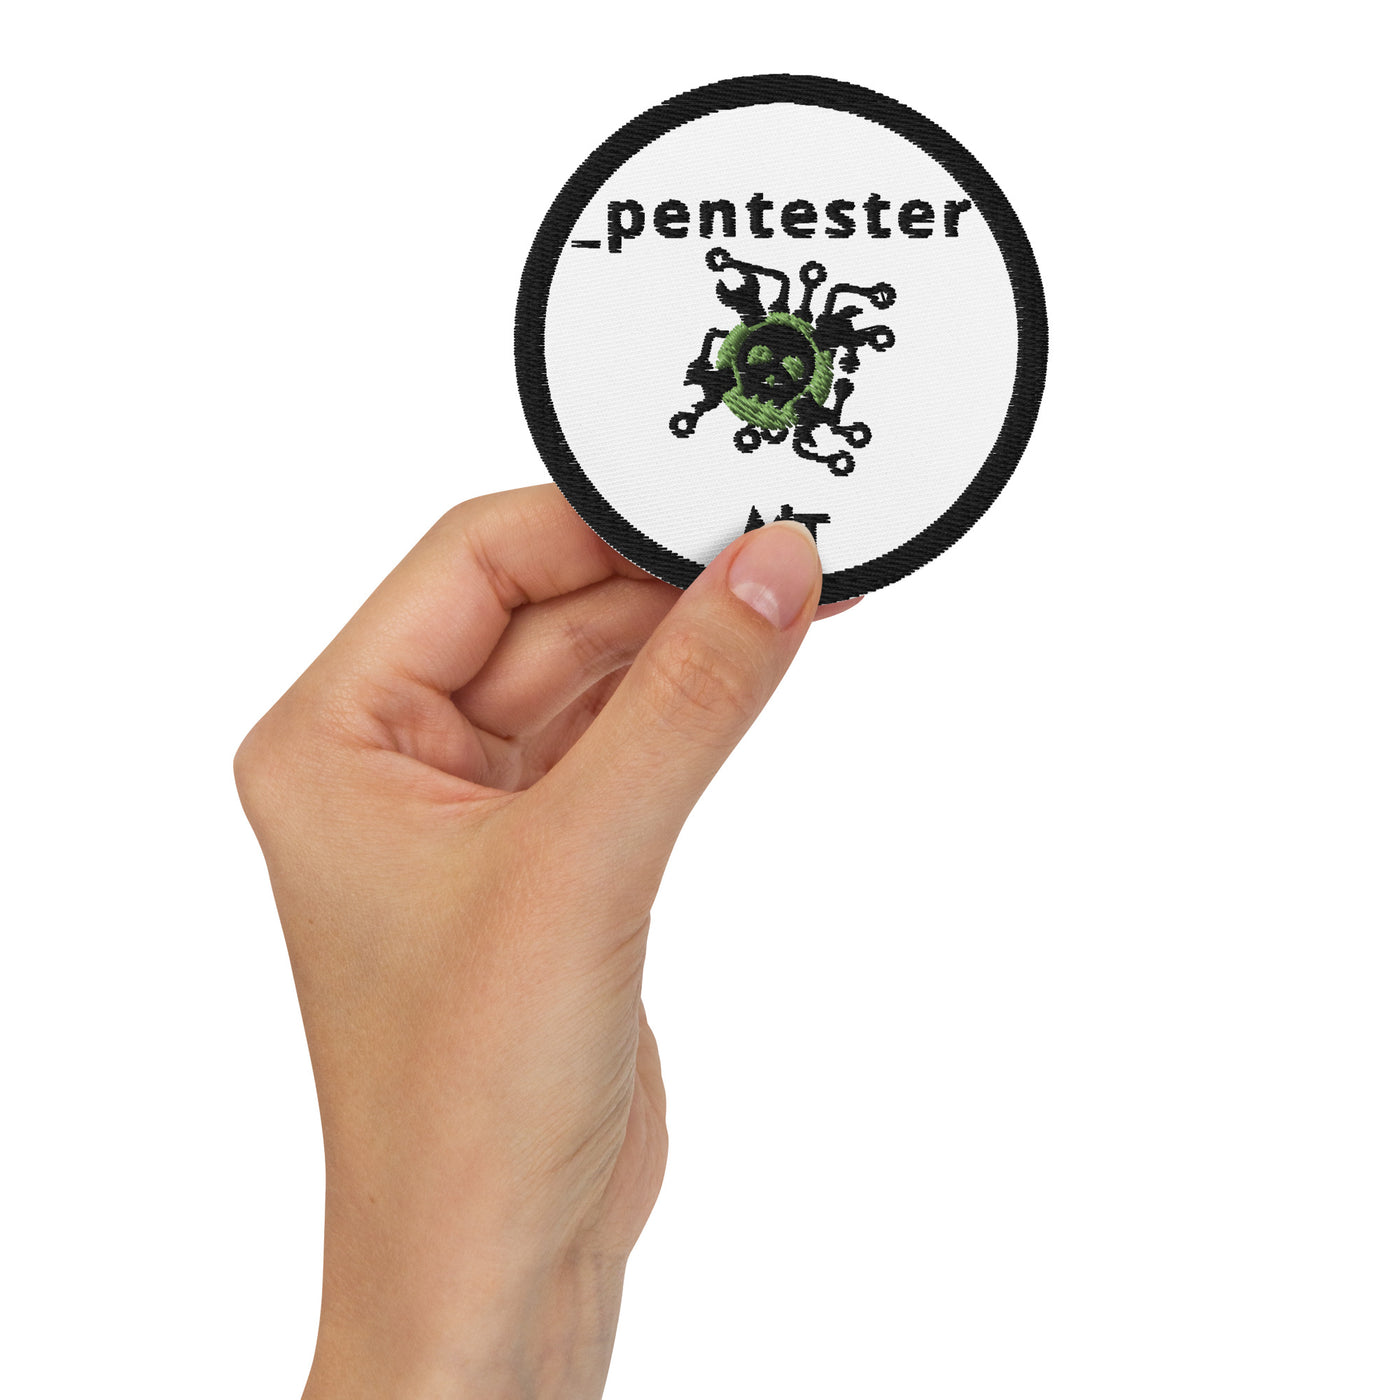 Pentester V4 - Embroidered patches